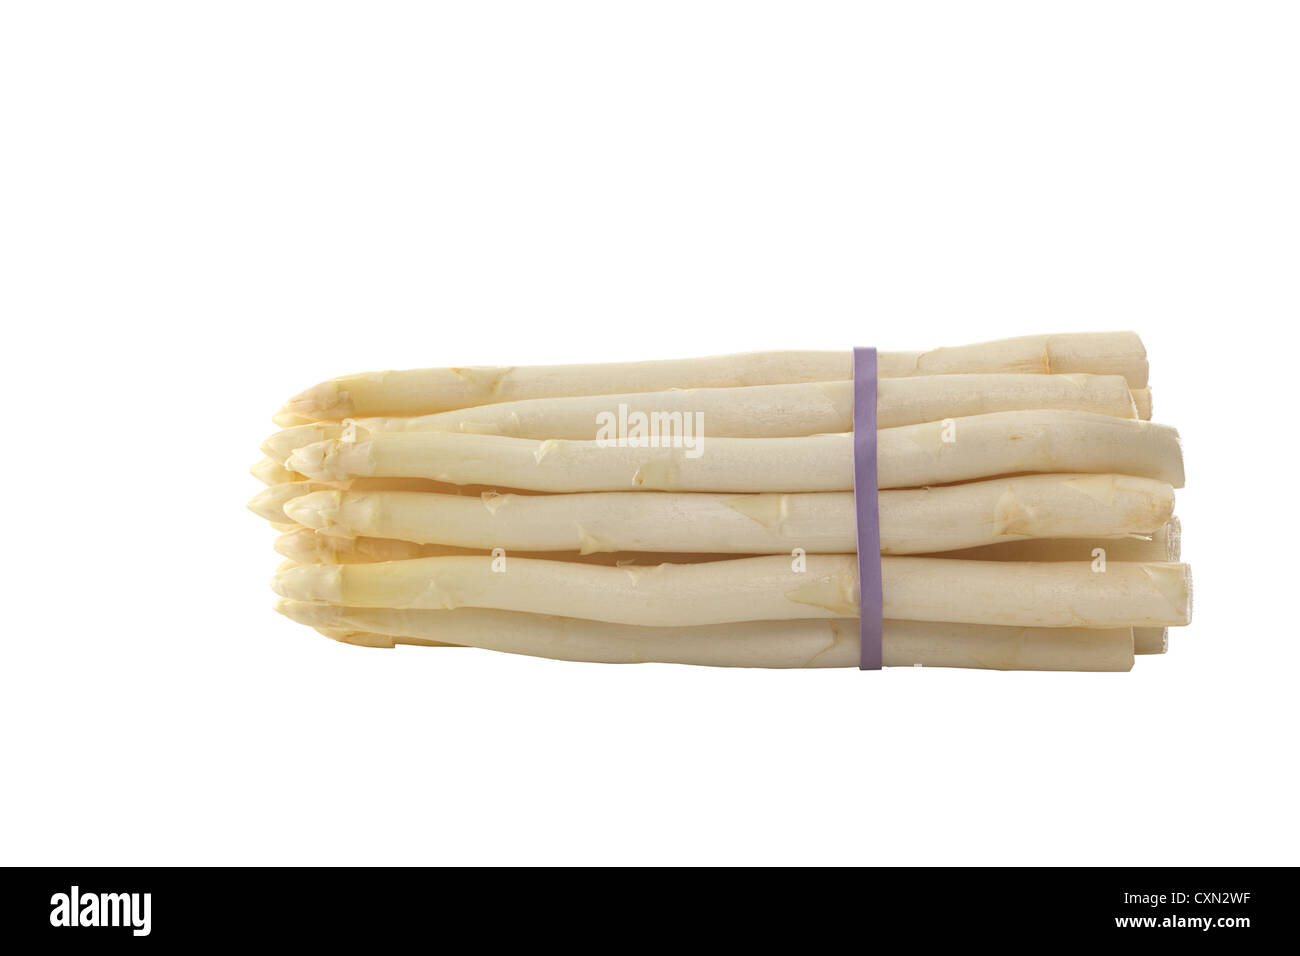 Raw white asparagus bunch held together by an elastic band photographed on white Stock Photo